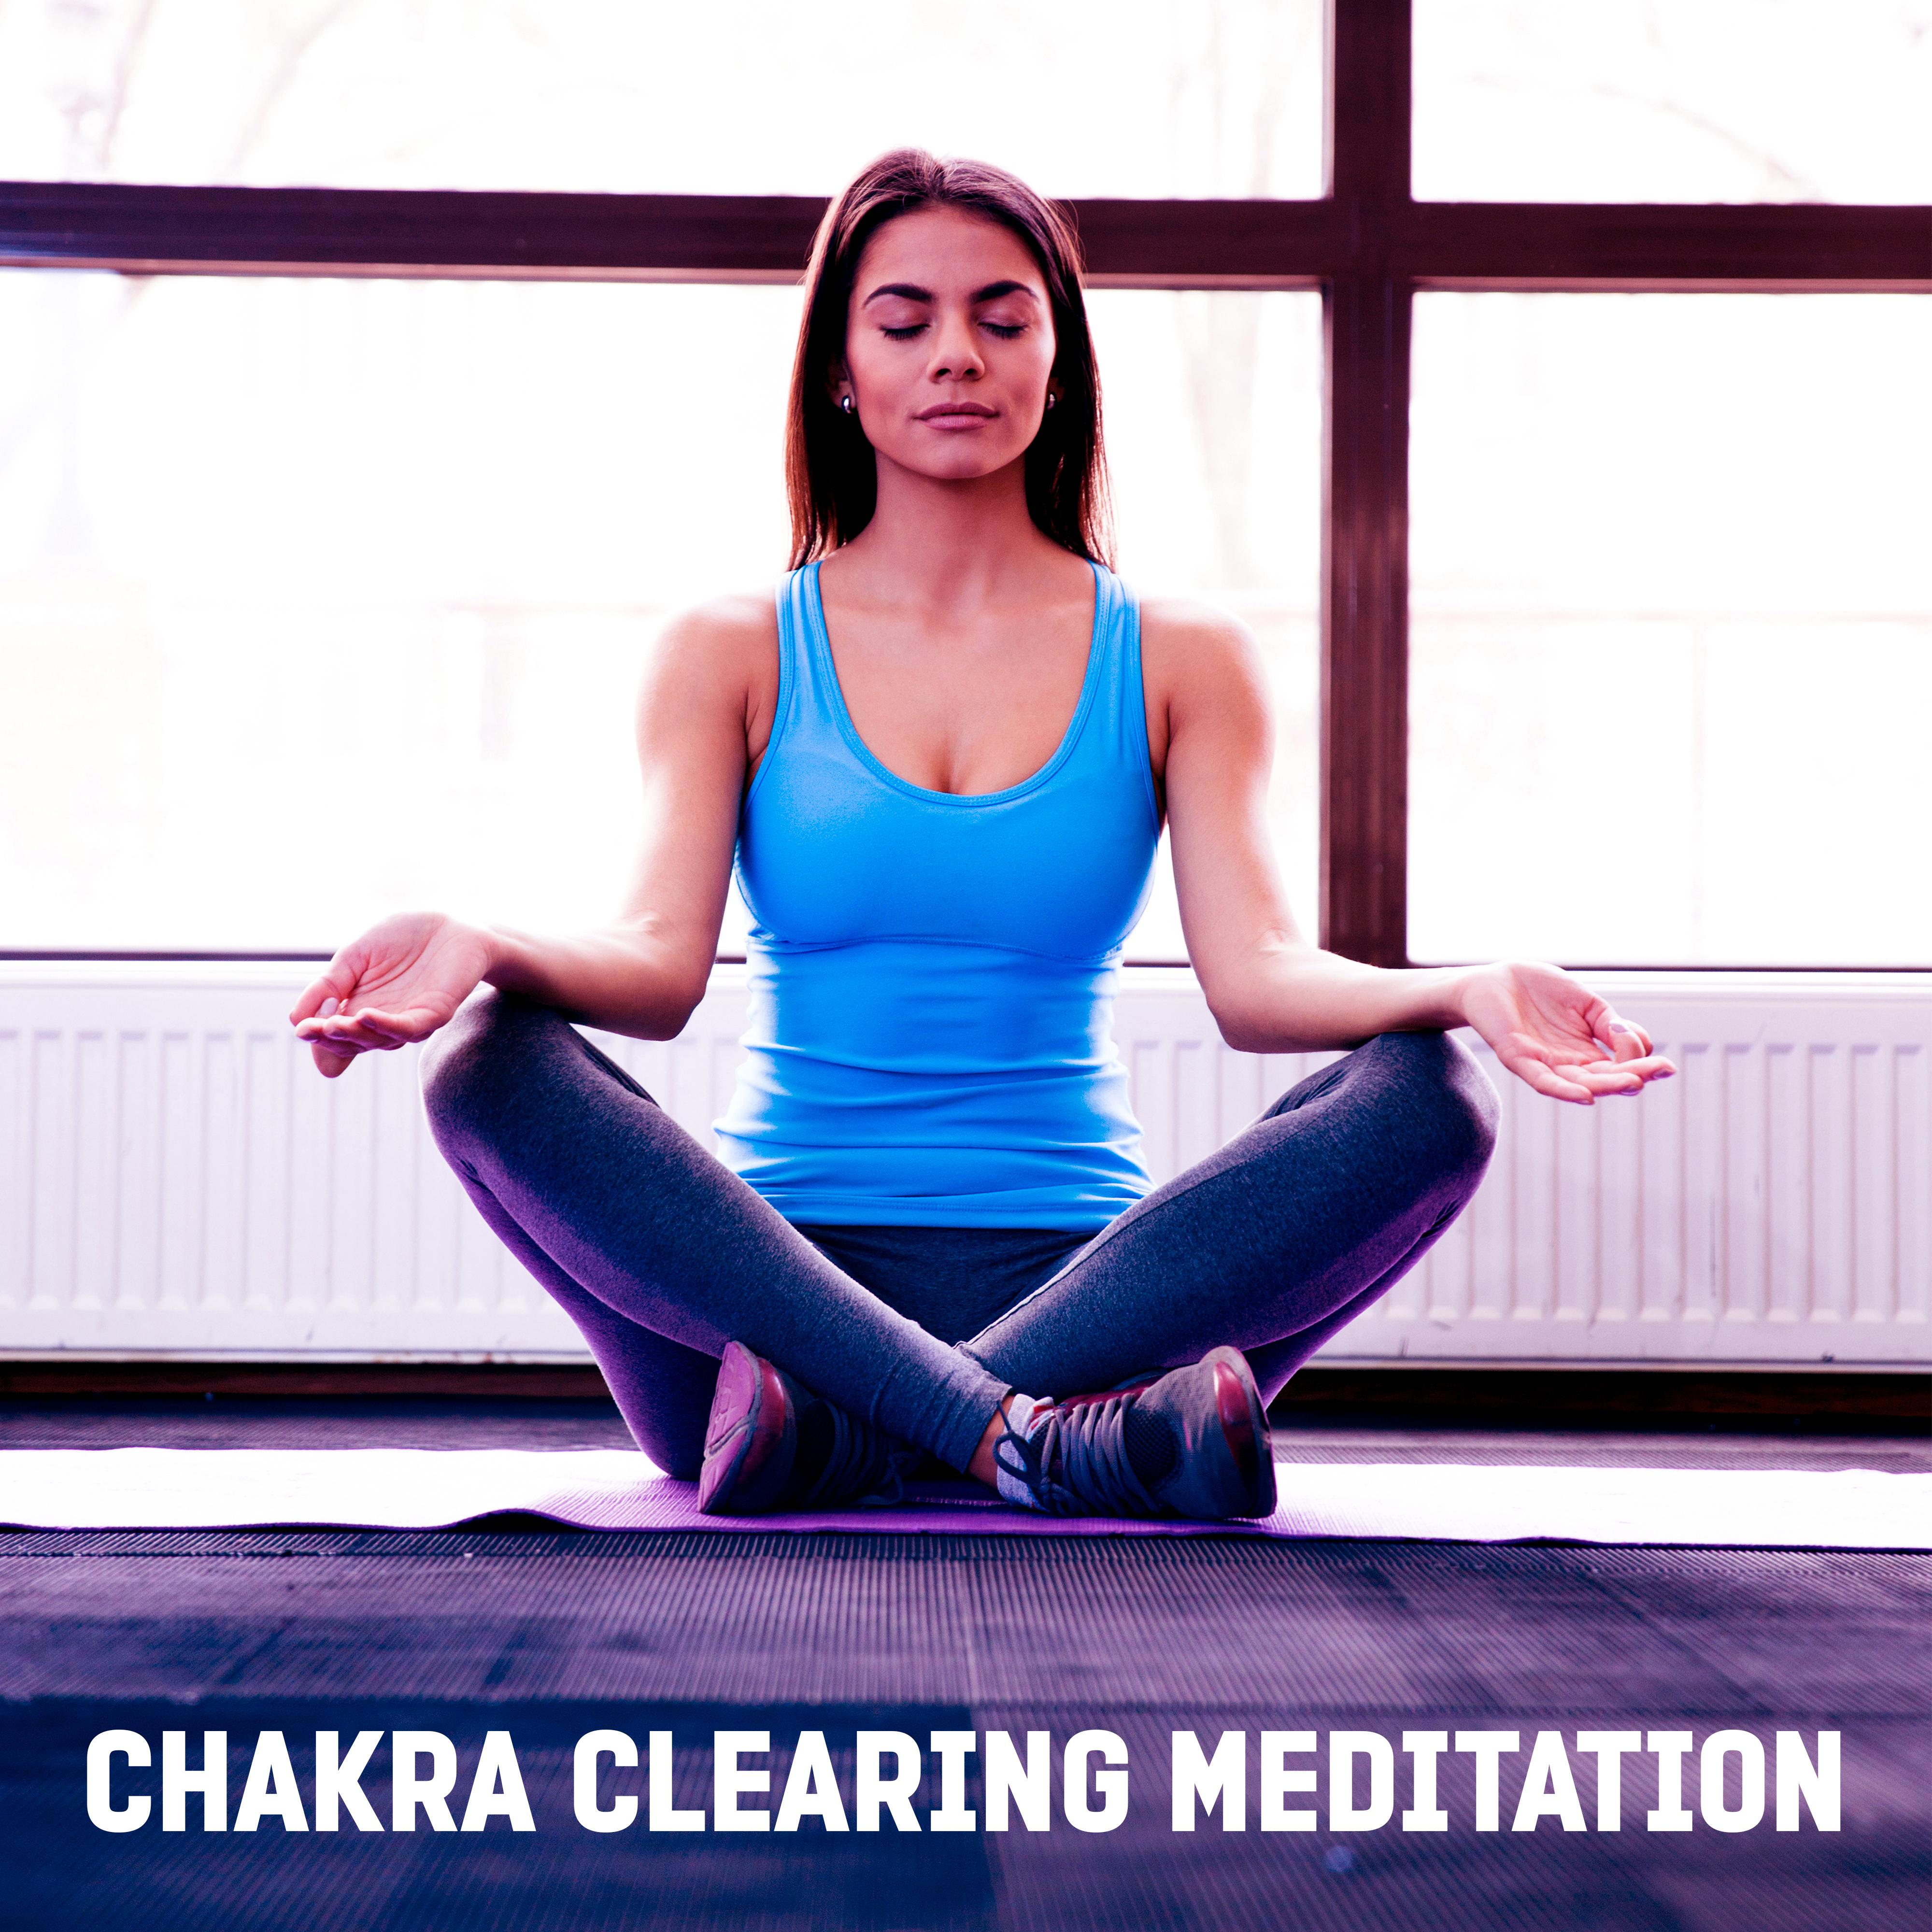 Chakra Clearing Meditation  Yoga Music, Healing Nature Sounds, Relaxing Music Before Sleep, Placid Songs